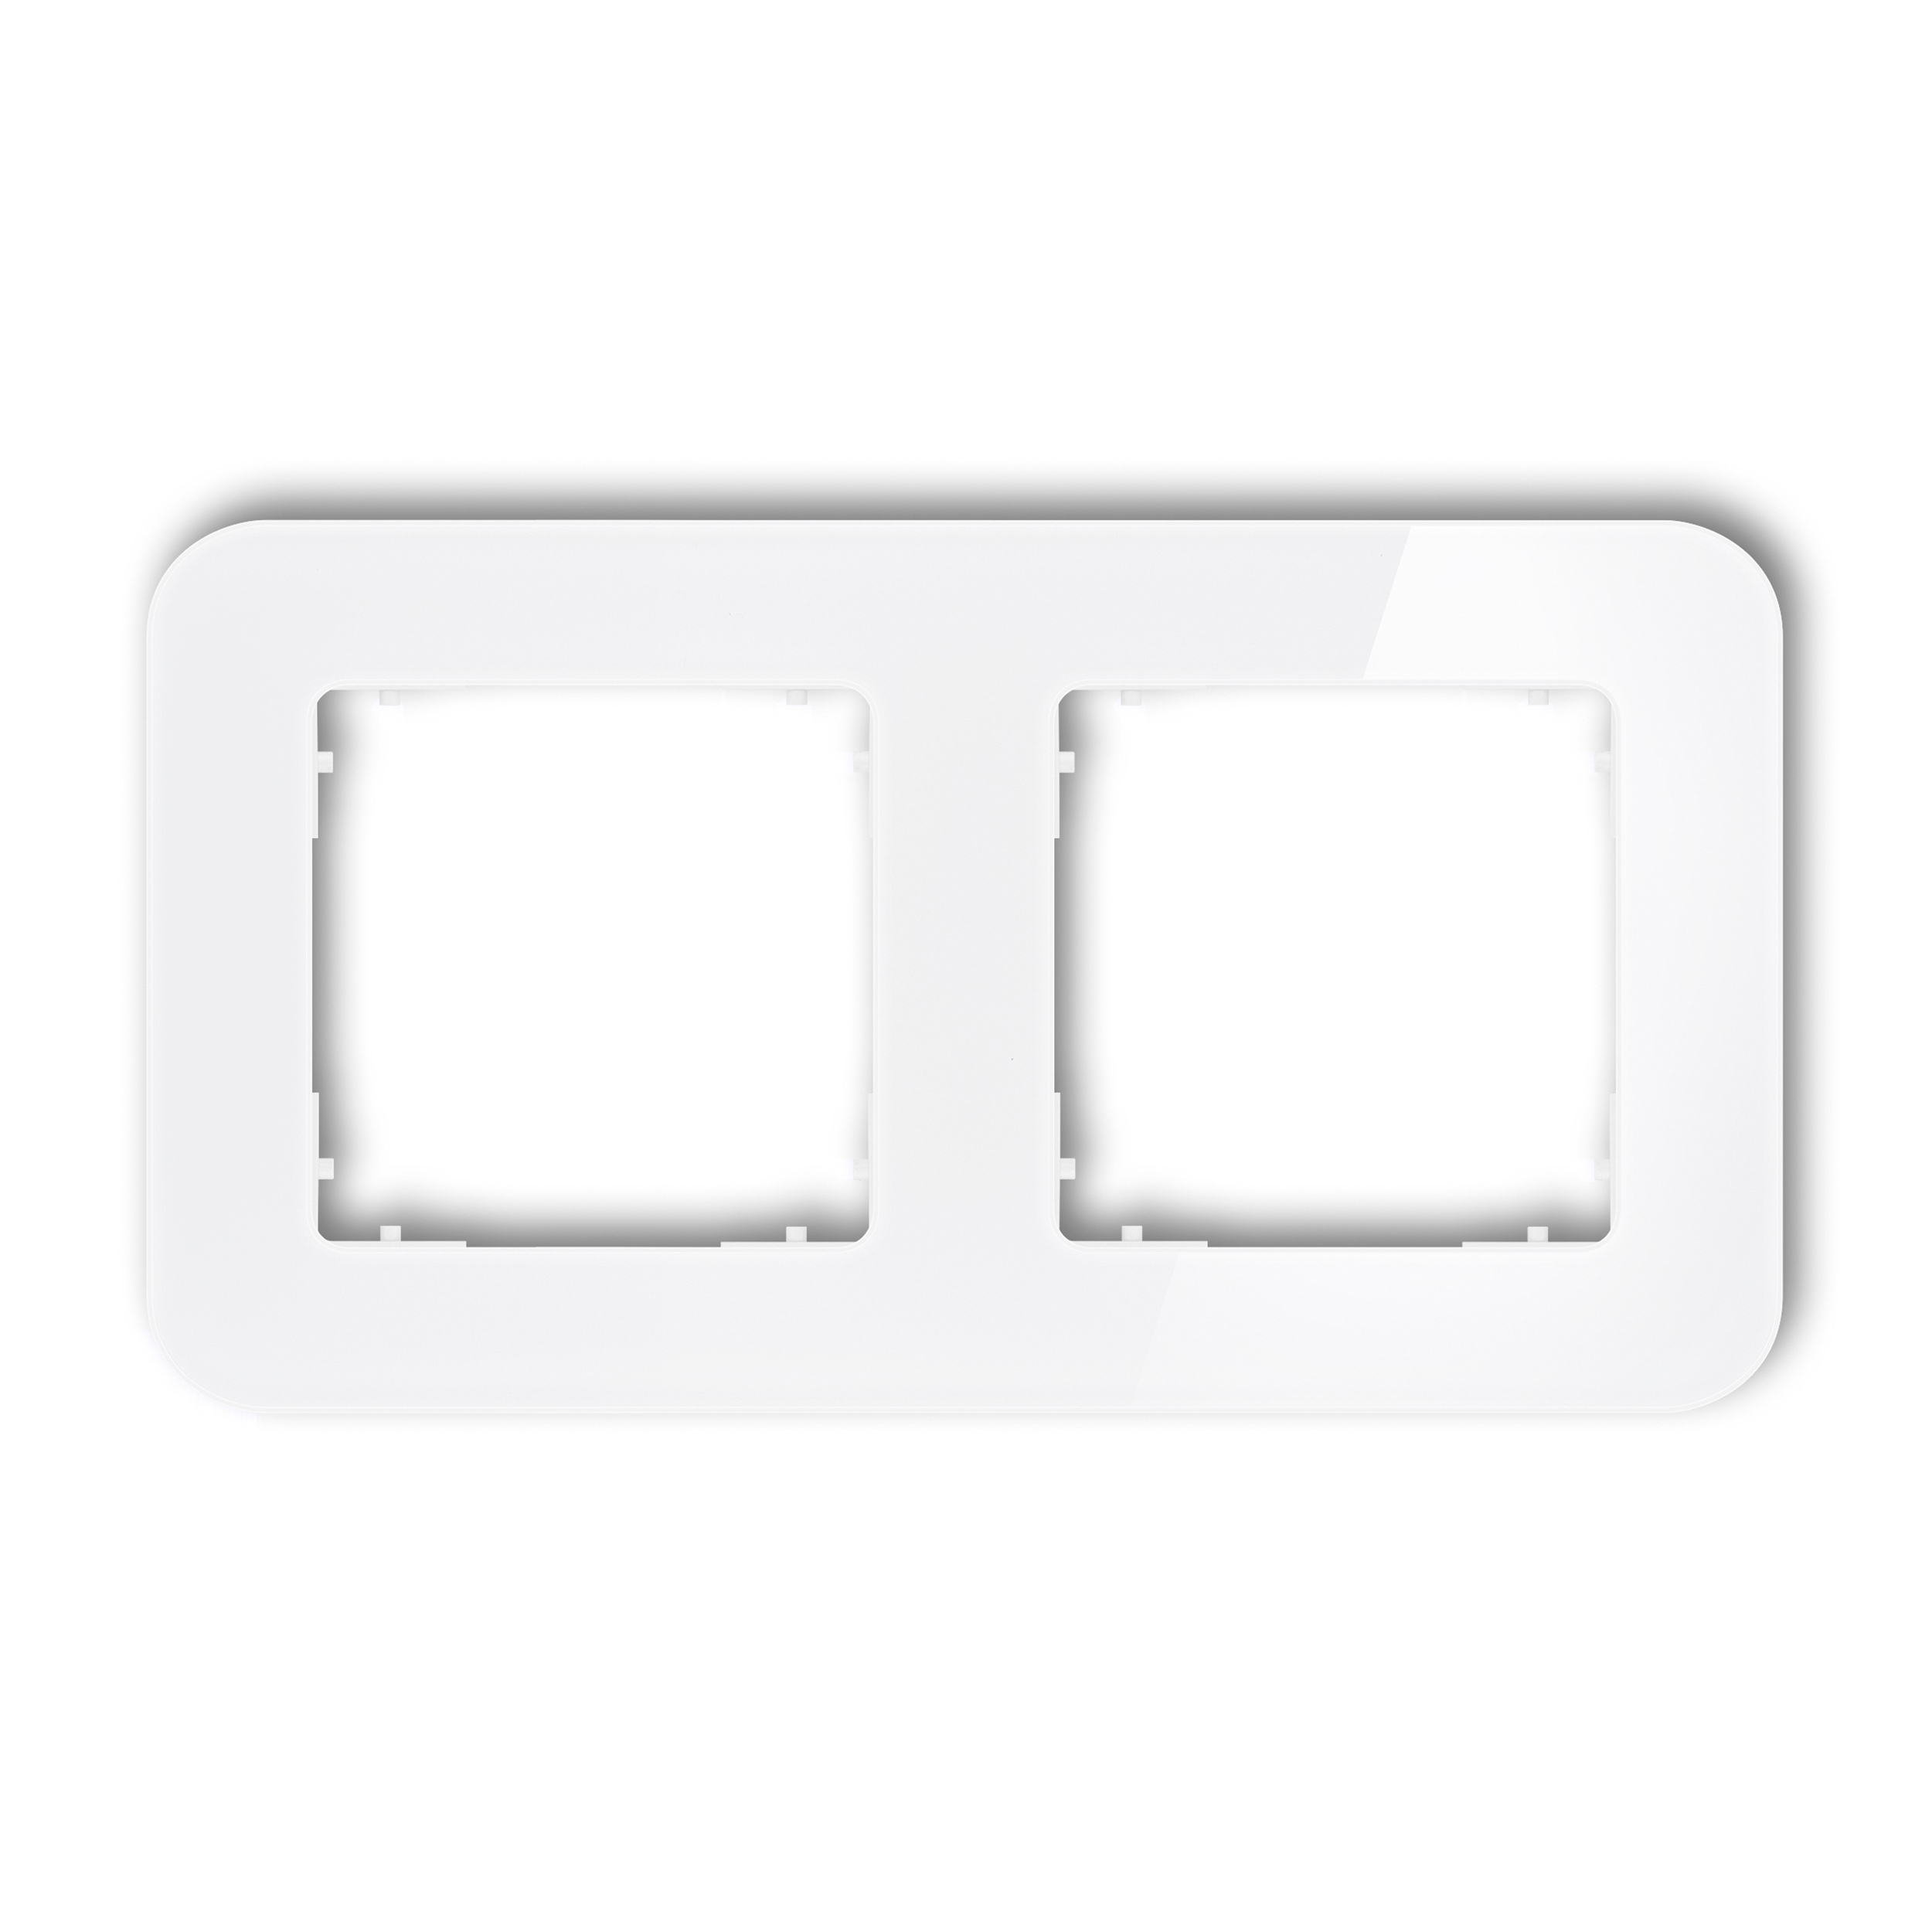 2-gang universal frame with rounded edges - glass effect